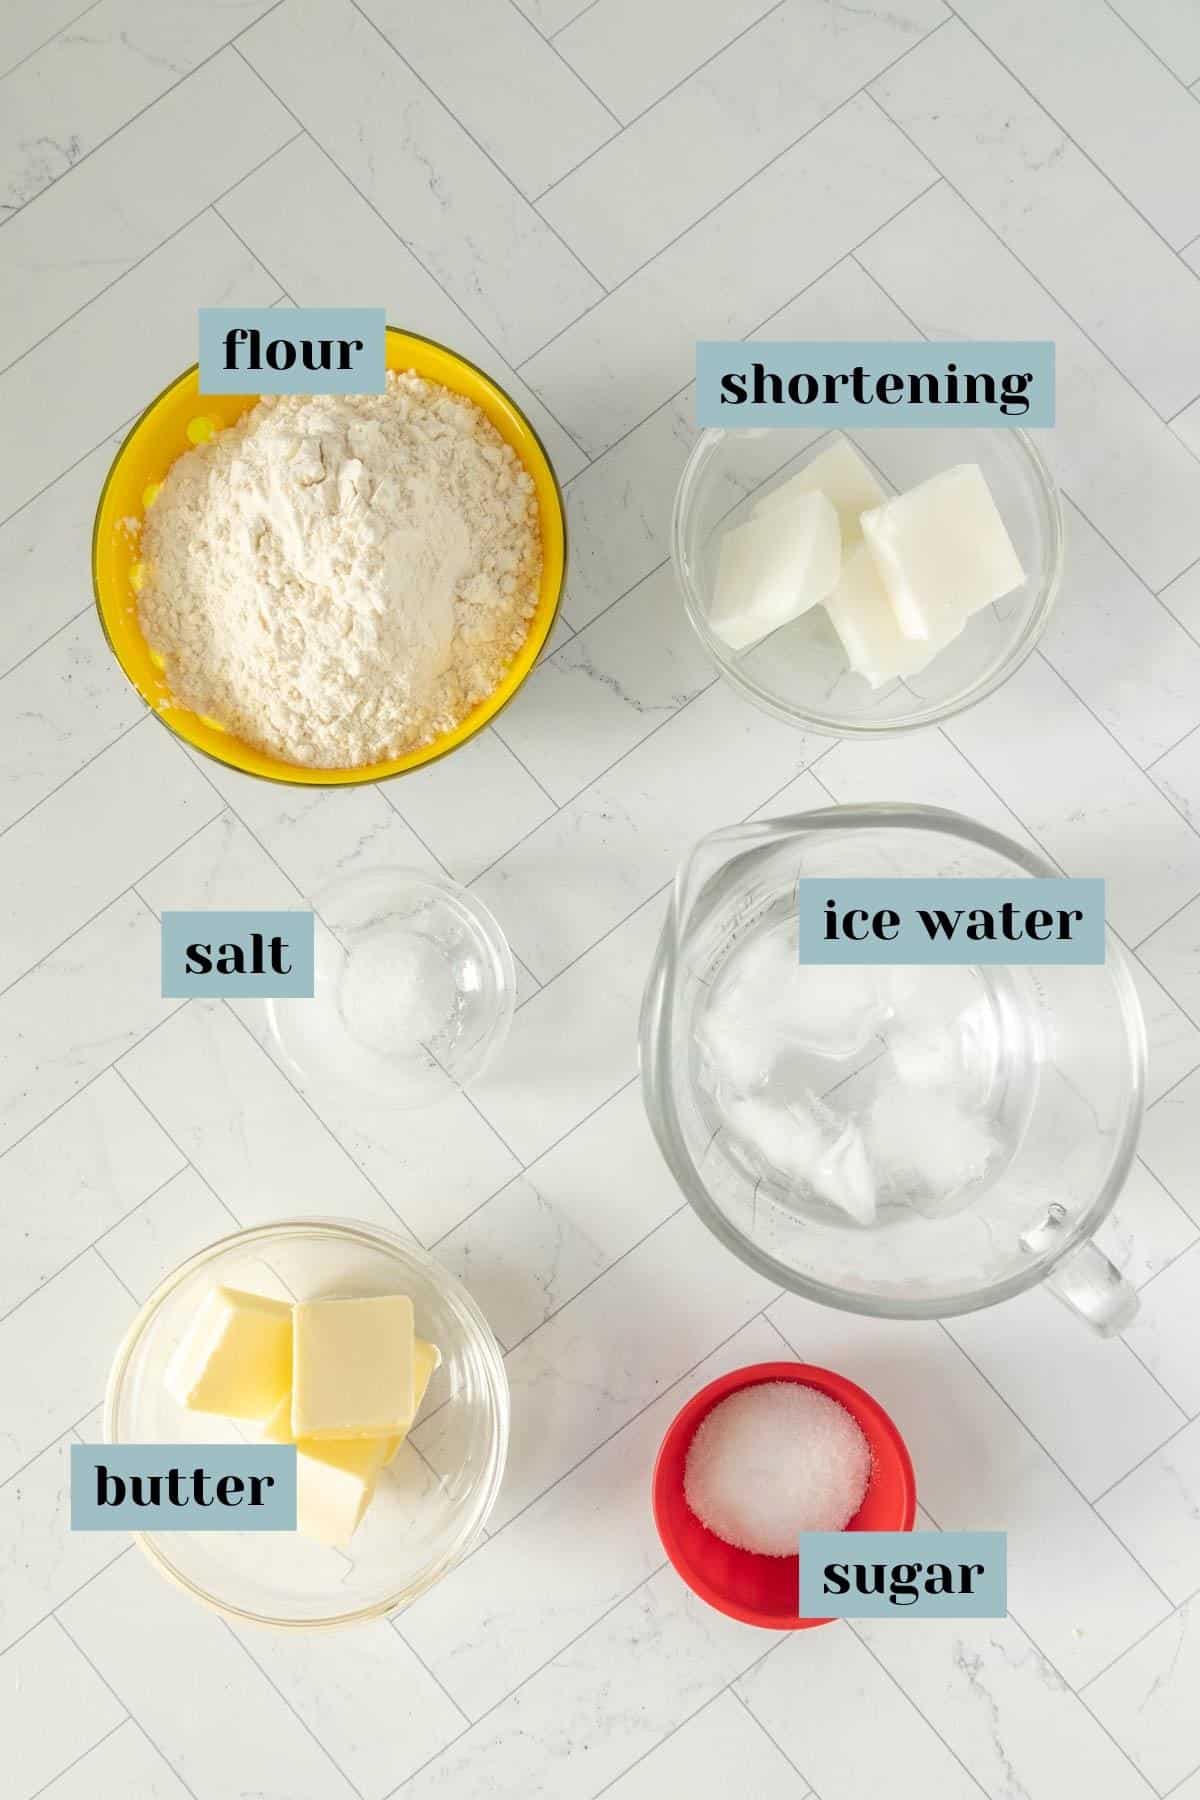 The ingredients for a homemade pie crust.